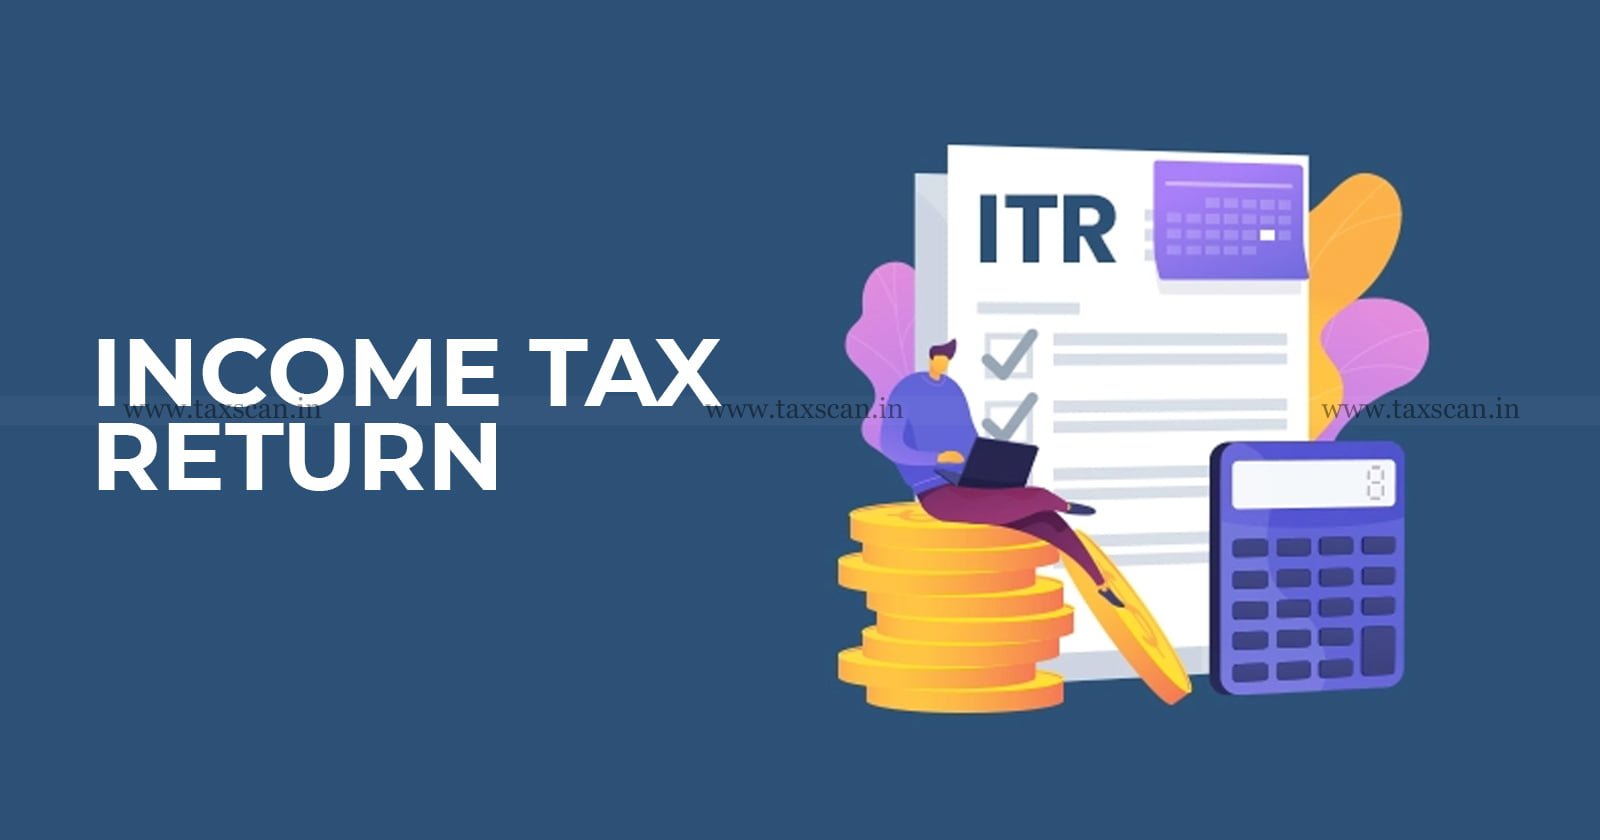 Notice issued - Ground - Concealment - Income - Kerala HC - grants - File ITR - taxscan